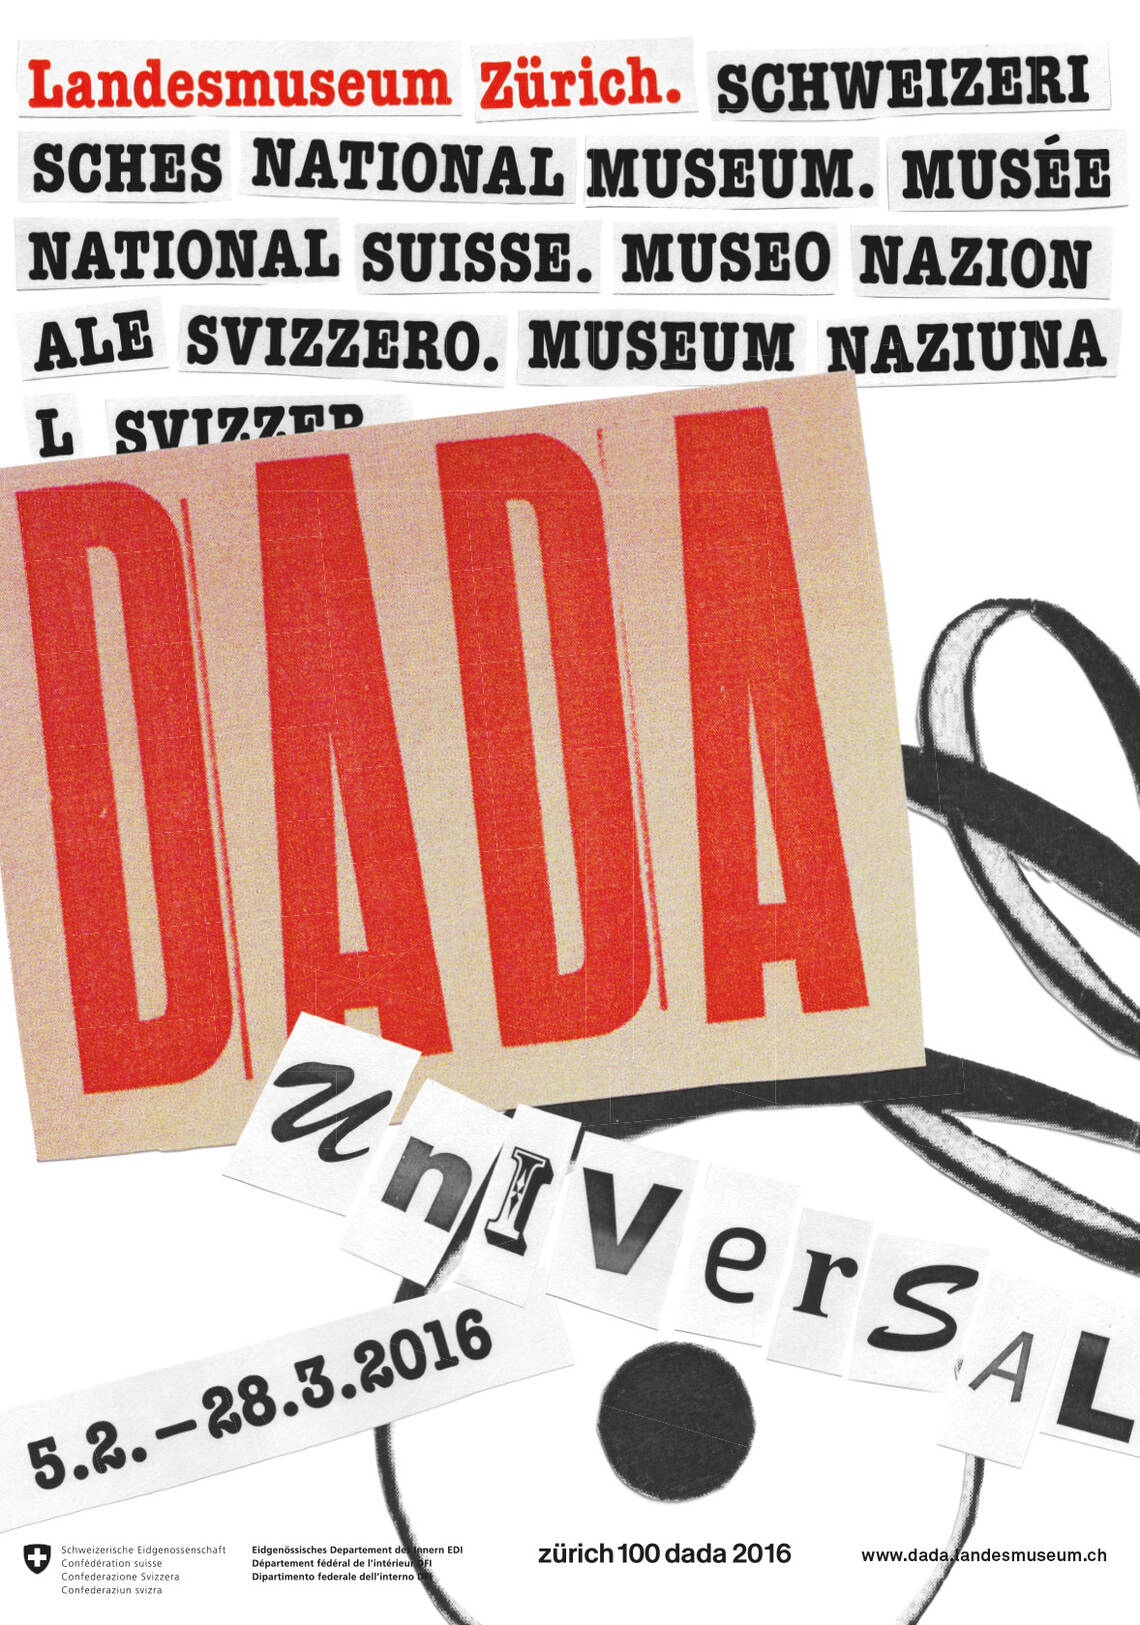 Poster of the exhibition "Dada Universal